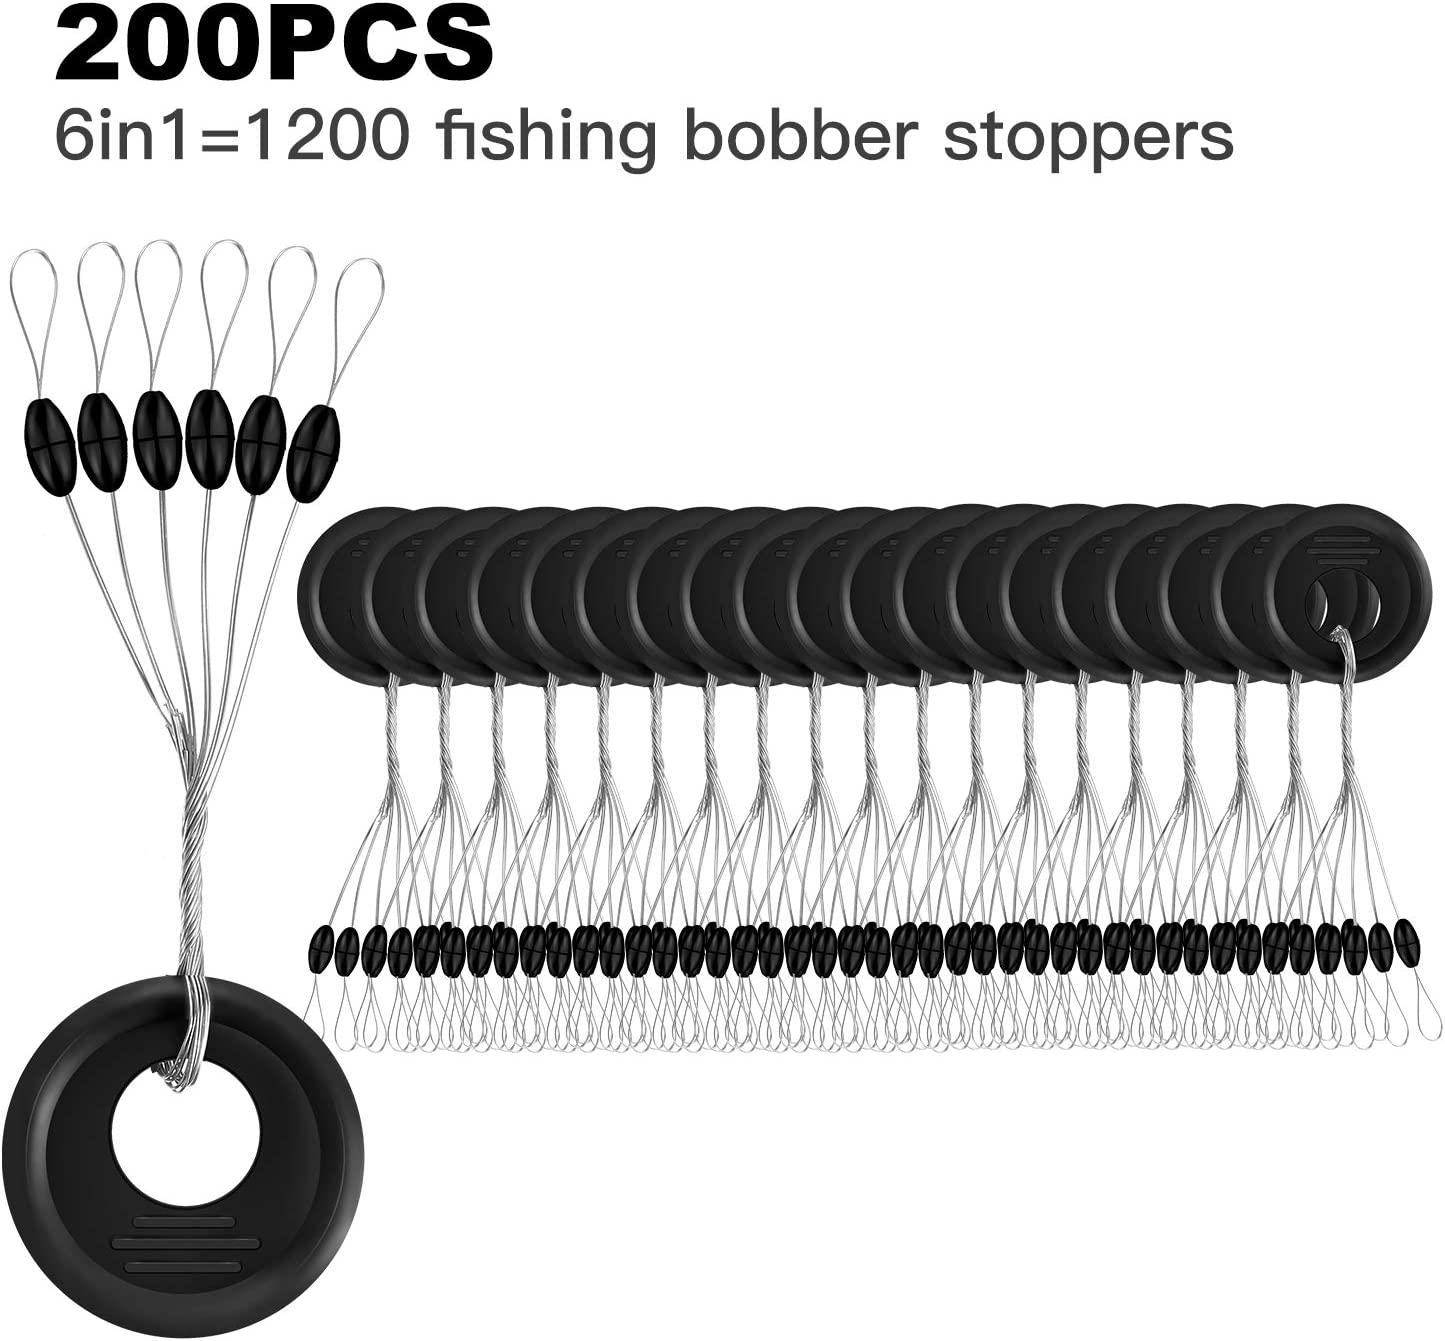 Outus 1200 Pieces Fishing Rubber Bobber Beads Stopper 6 in 1 Black